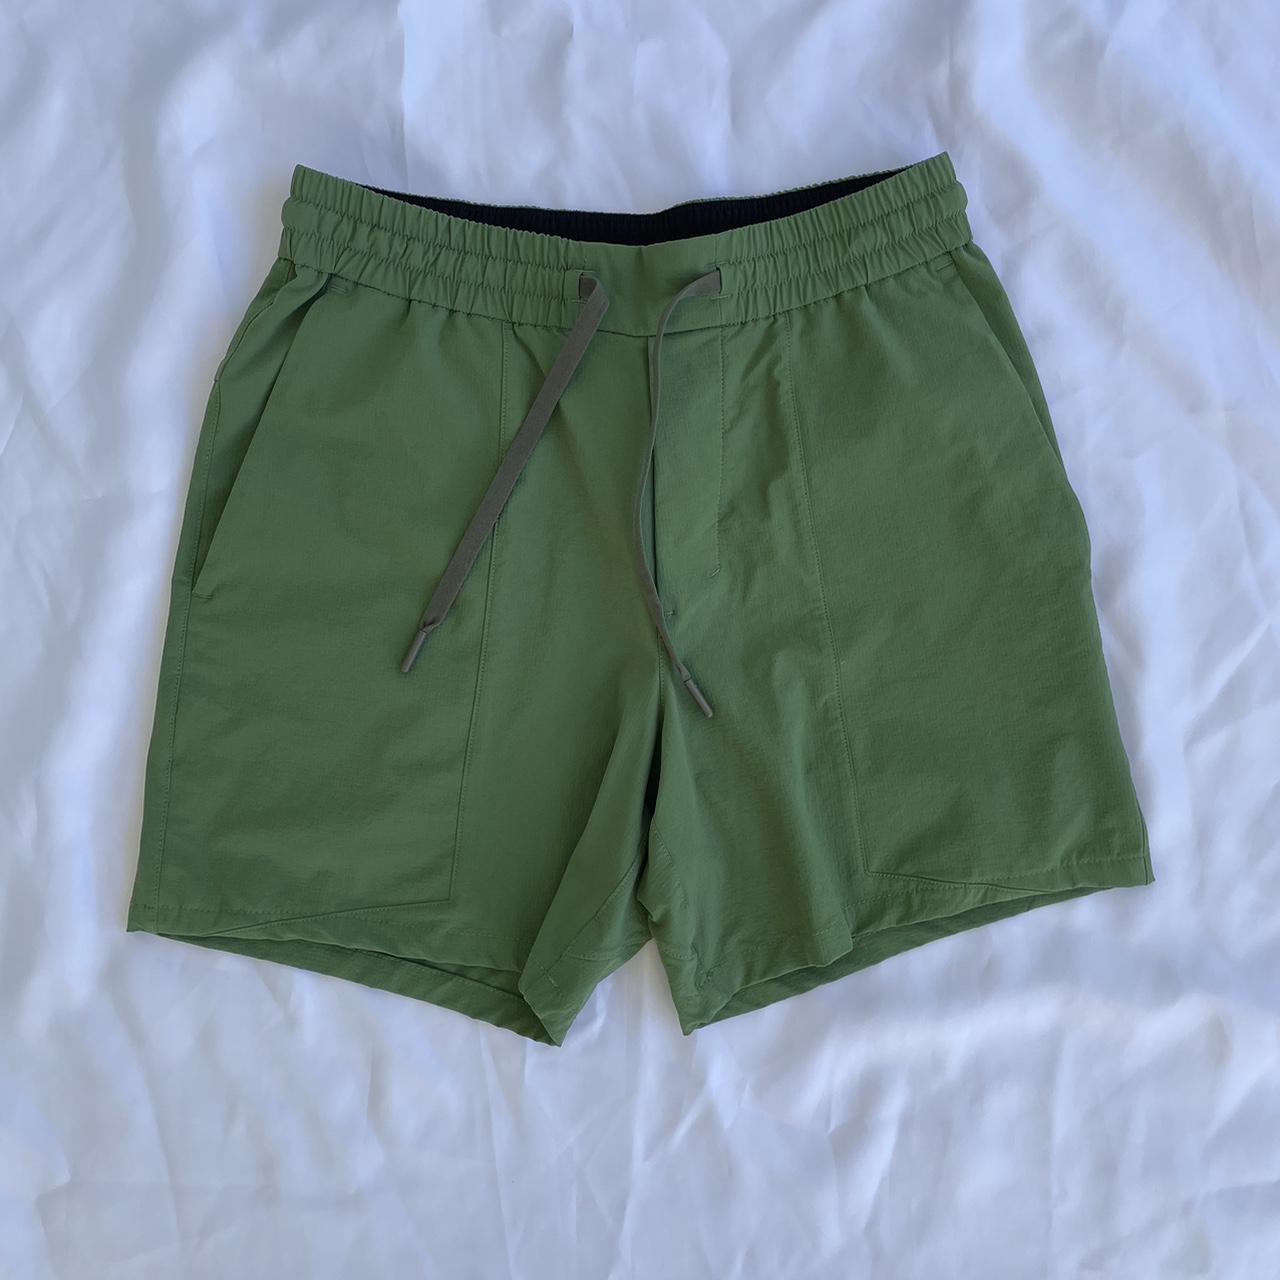 Lululemon shorts size small no flaws perfect... - Depop